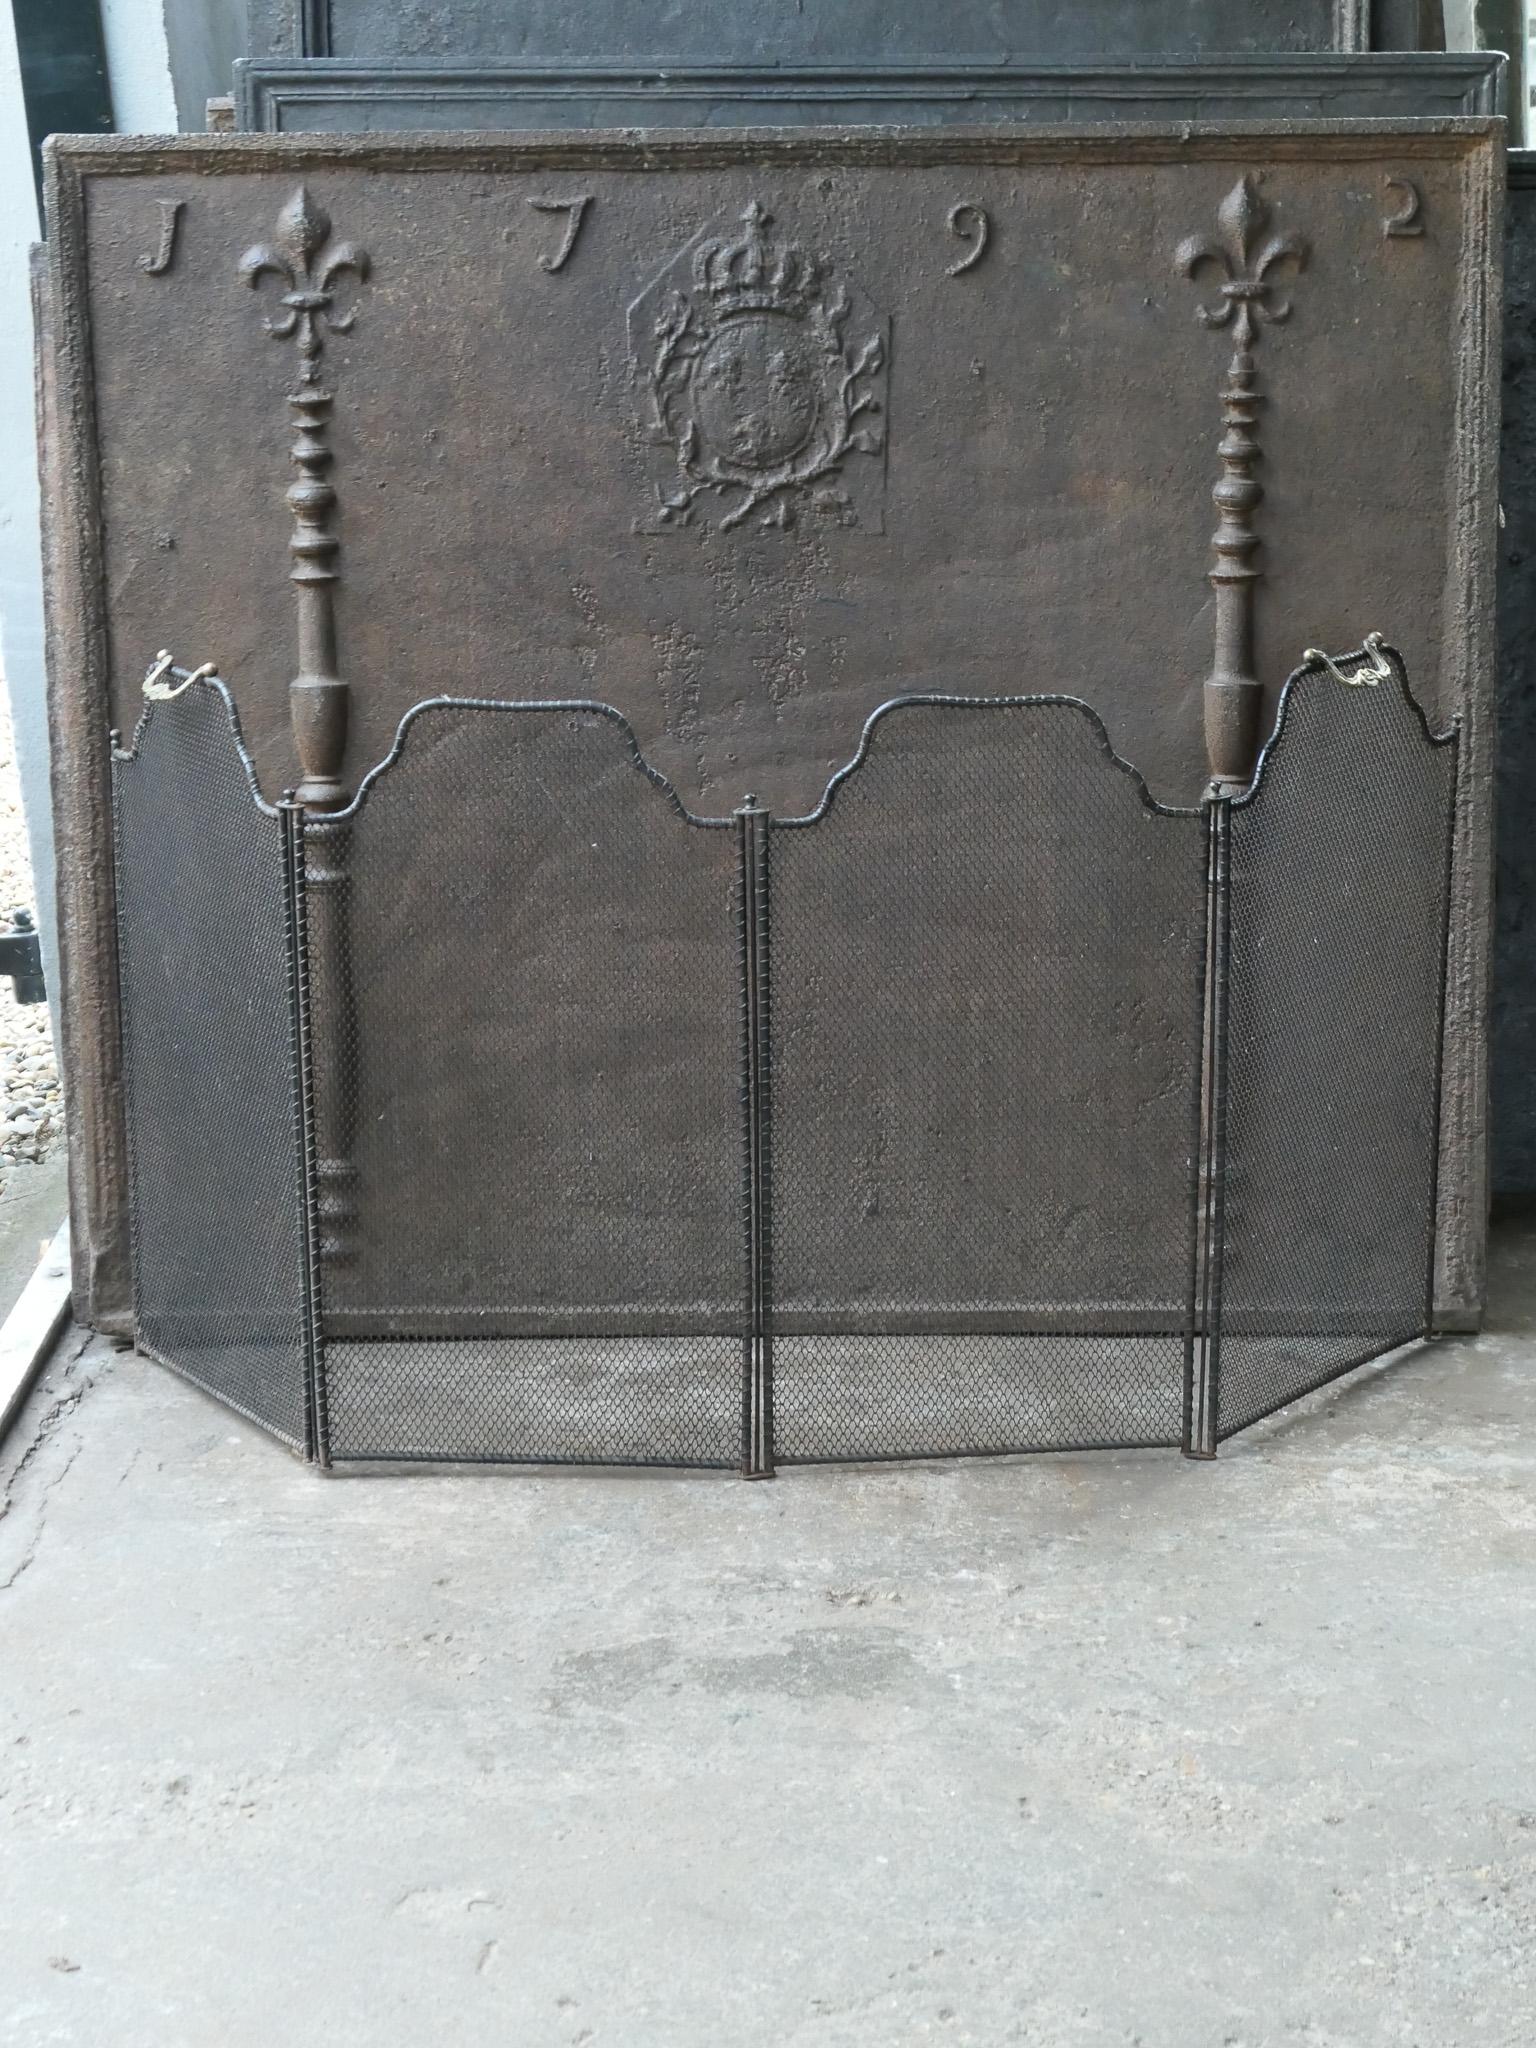 19th century French Napoleon III 4-panel fireplace screen. The screen is made of iron and iron mesh and has black color. It is in a good condition and is fit for use in front of the fireplace.